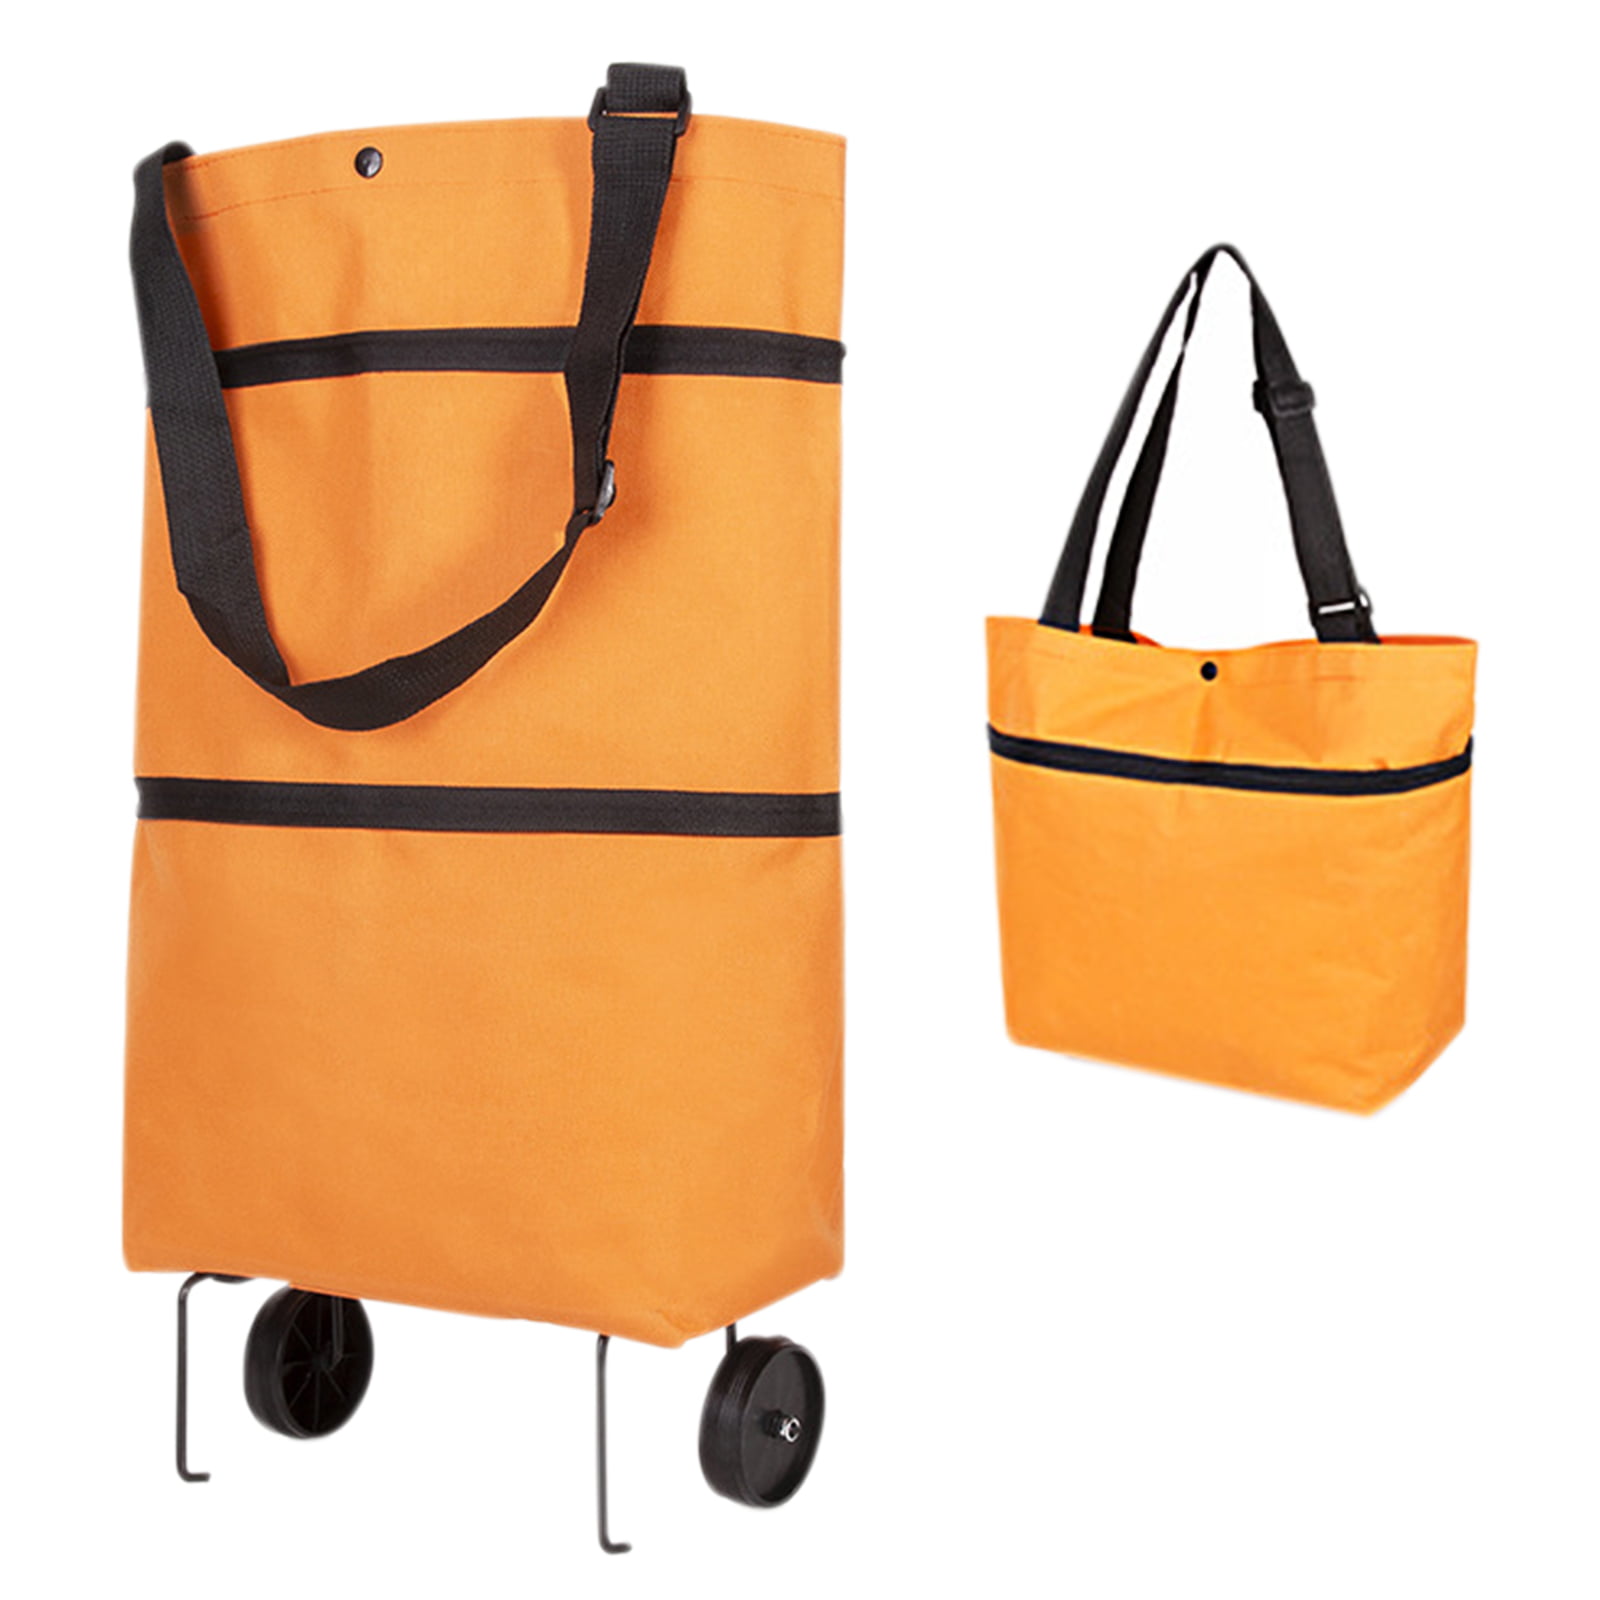 Foldable Multipurpose Shopping Bag Supermarket Reusable Grocery Bag with Wheels 